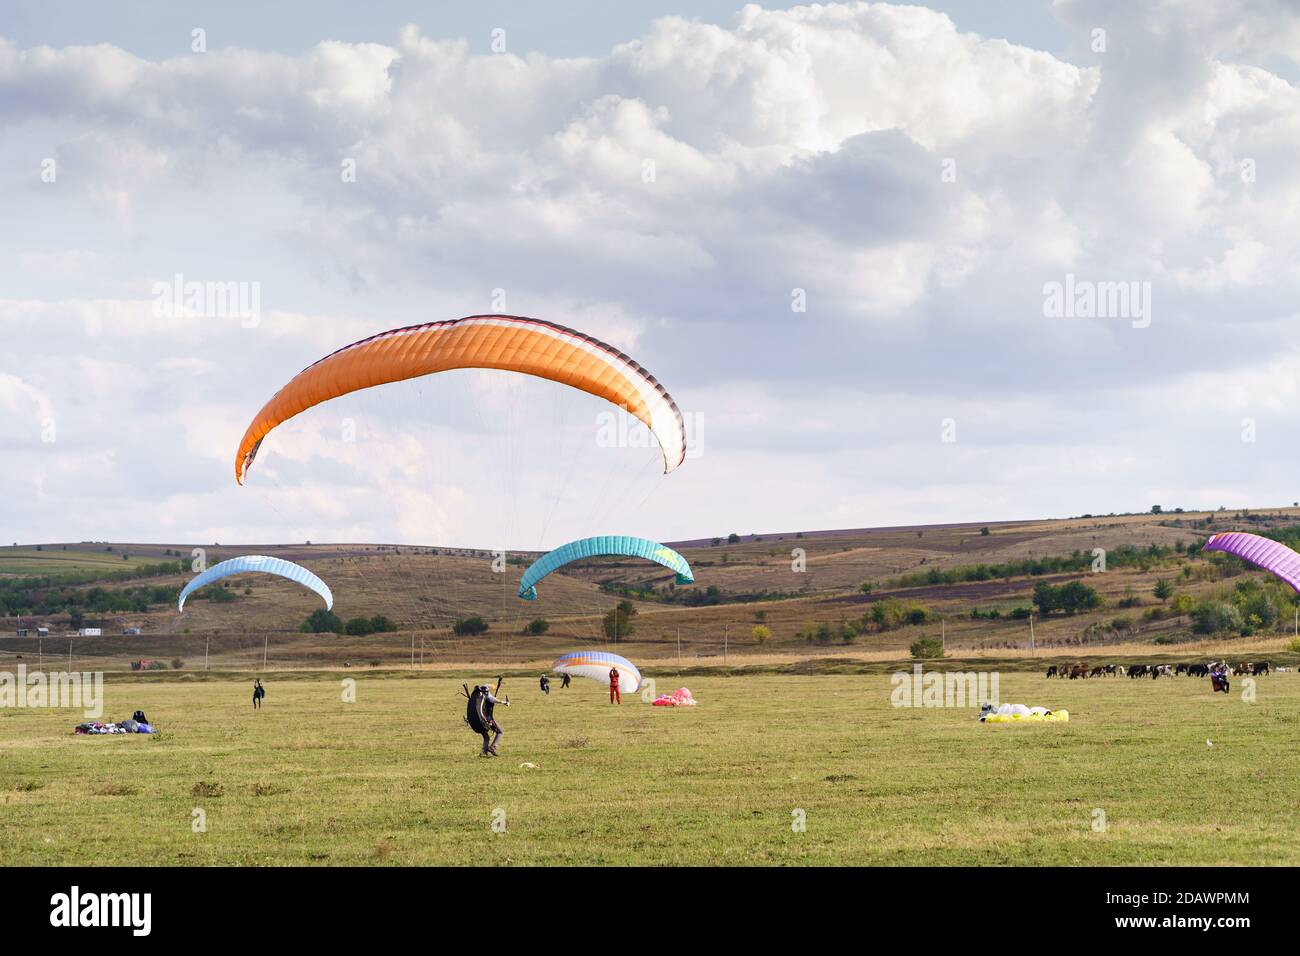 Paragliders silhouette flying over beautiful green landscape under blue sky with clouds. Paragliding school, practice Stock Photo